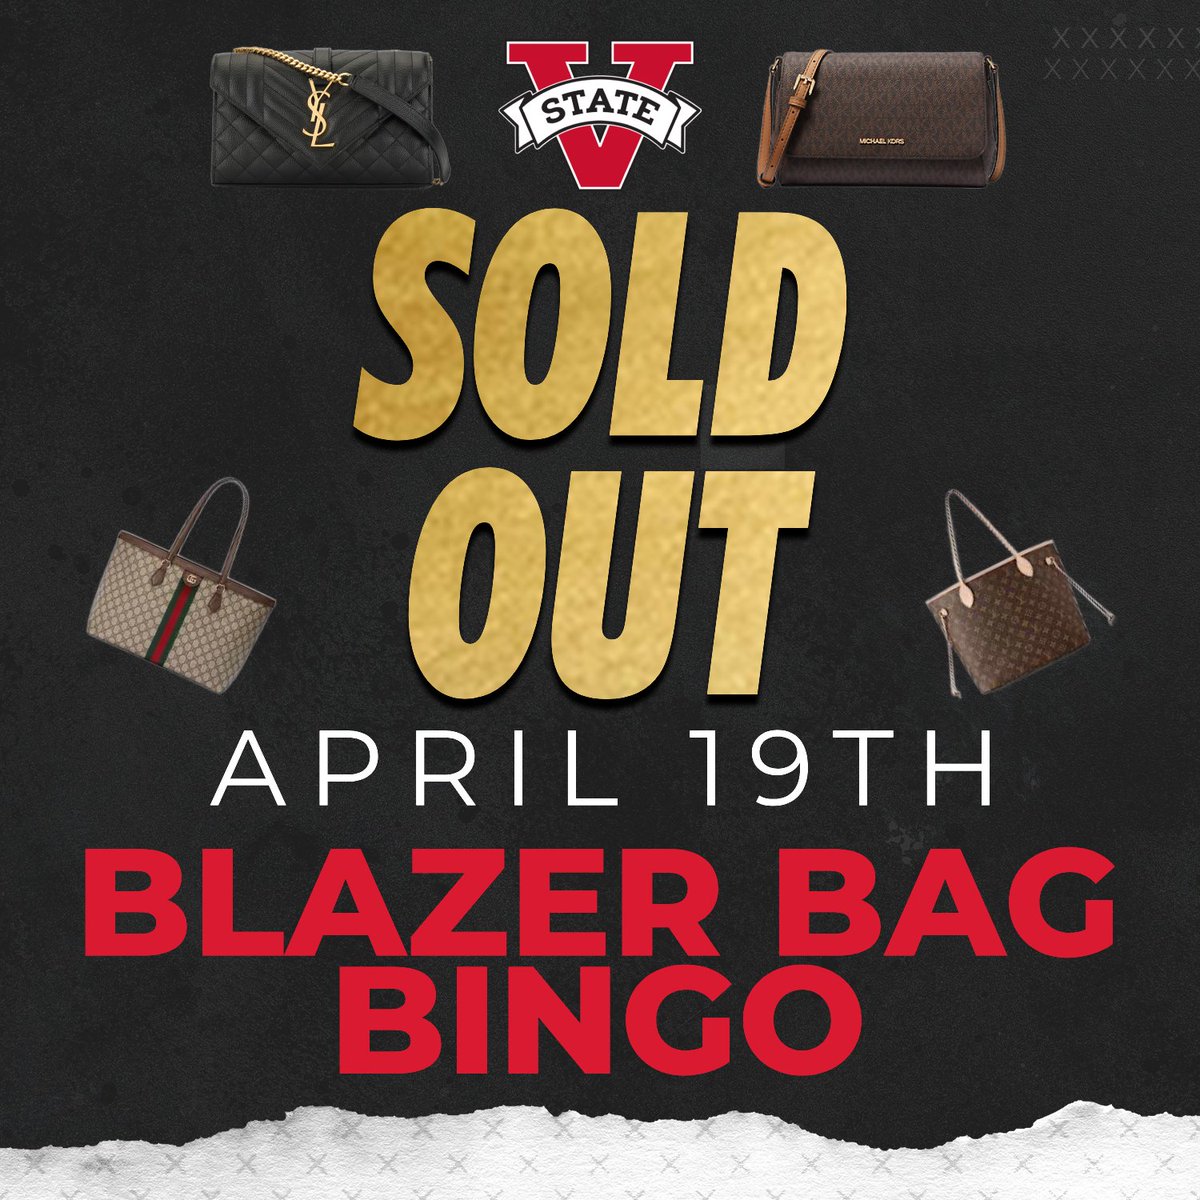 Blazer Bag Bingo is officially sold out!! We're looking forward to a wonderful night Friday! See y'all then!